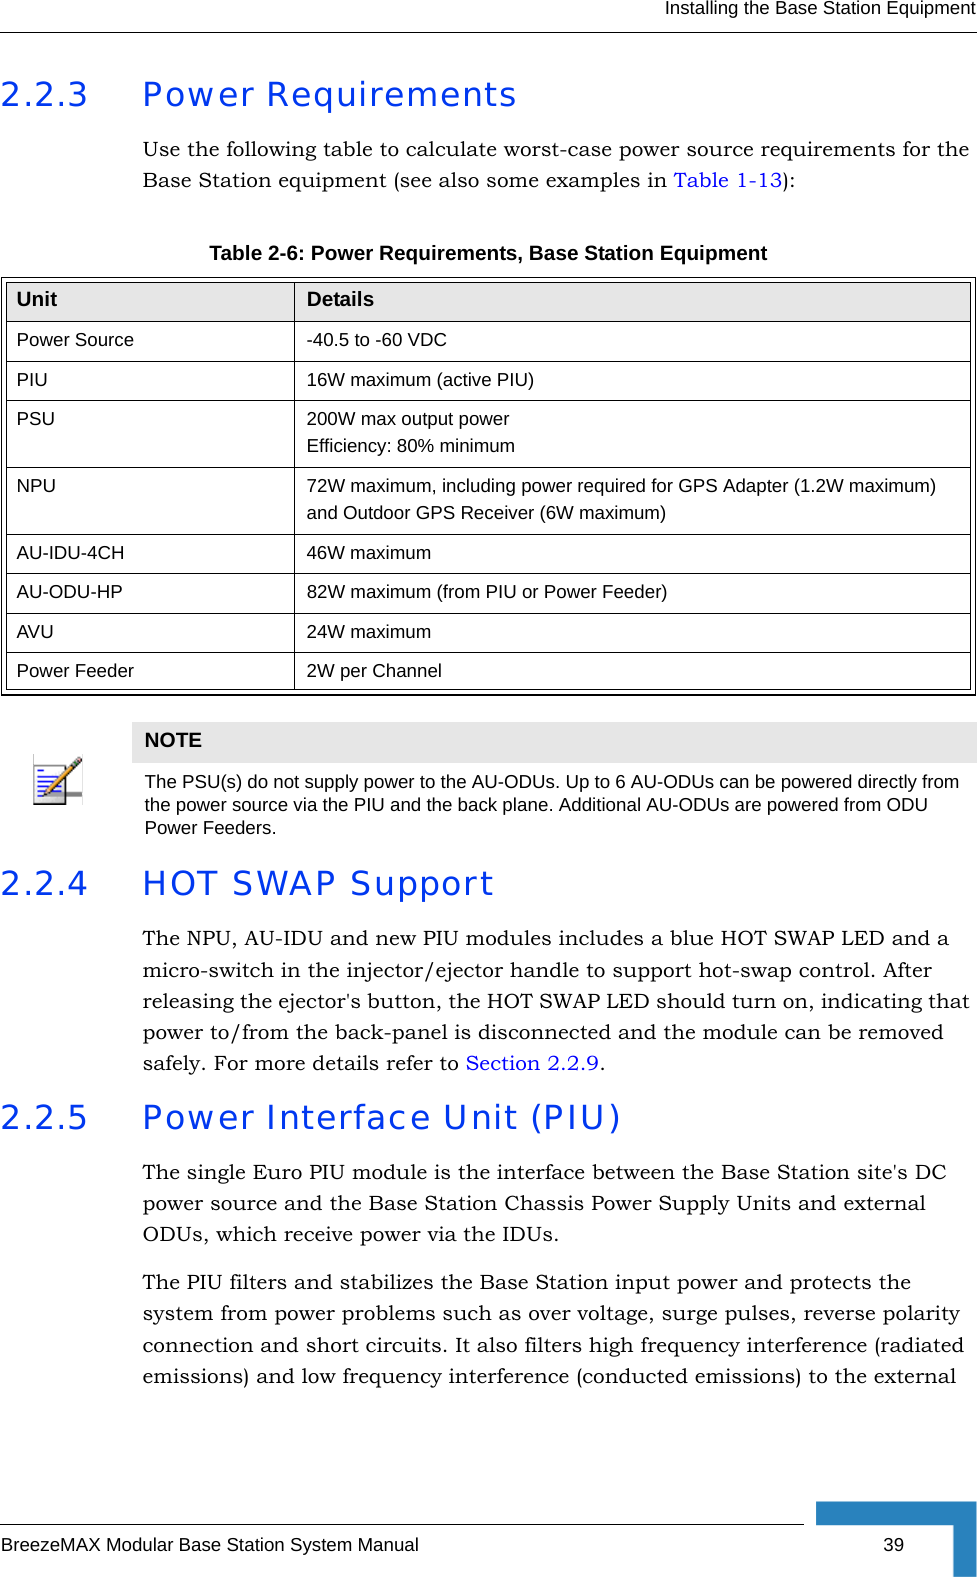 Installing the Base Station EquipmentBreezeMAX Modular Base Station System Manual 392.2.3 Power RequirementsUse the following table to calculate worst-case power source requirements for the Base Station equipment (see also some examples in Table 1-13):2.2.4 HOT SWAP SupportThe NPU, AU-IDU and new PIU modules includes a blue HOT SWAP LED and a micro-switch in the injector/ejector handle to support hot-swap control. After releasing the ejector&apos;s button, the HOT SWAP LED should turn on, indicating that power to/from the back-panel is disconnected and the module can be removed safely. For more details refer to Section 2.2.9.2.2.5 Power Interface Unit (PIU)The single Euro PIU module is the interface between the Base Station site&apos;s DC power source and the Base Station Chassis Power Supply Units and external ODUs, which receive power via the IDUs. The PIU filters and stabilizes the Base Station input power and protects the system from power problems such as over voltage, surge pulses, reverse polarity connection and short circuits. It also filters high frequency interference (radiated emissions) and low frequency interference (conducted emissions) to the external Table 2-6: Power Requirements, Base Station EquipmentUnit Details Power Source -40.5 to -60 VDCPIU  16W maximum (active PIU)PSU 200W max output powerEfficiency: 80% minimumNPU 72W maximum, including power required for GPS Adapter (1.2W maximum) and Outdoor GPS Receiver (6W maximum)AU-IDU-4CH 46W maximumAU-ODU-HP 82W maximum (from PIU or Power Feeder)AVU 24W maximumPower Feeder 2W per ChannelNOTEThe PSU(s) do not supply power to the AU-ODUs. Up to 6 AU-ODUs can be powered directly from the power source via the PIU and the back plane. Additional AU-ODUs are powered from ODU Power Feeders.